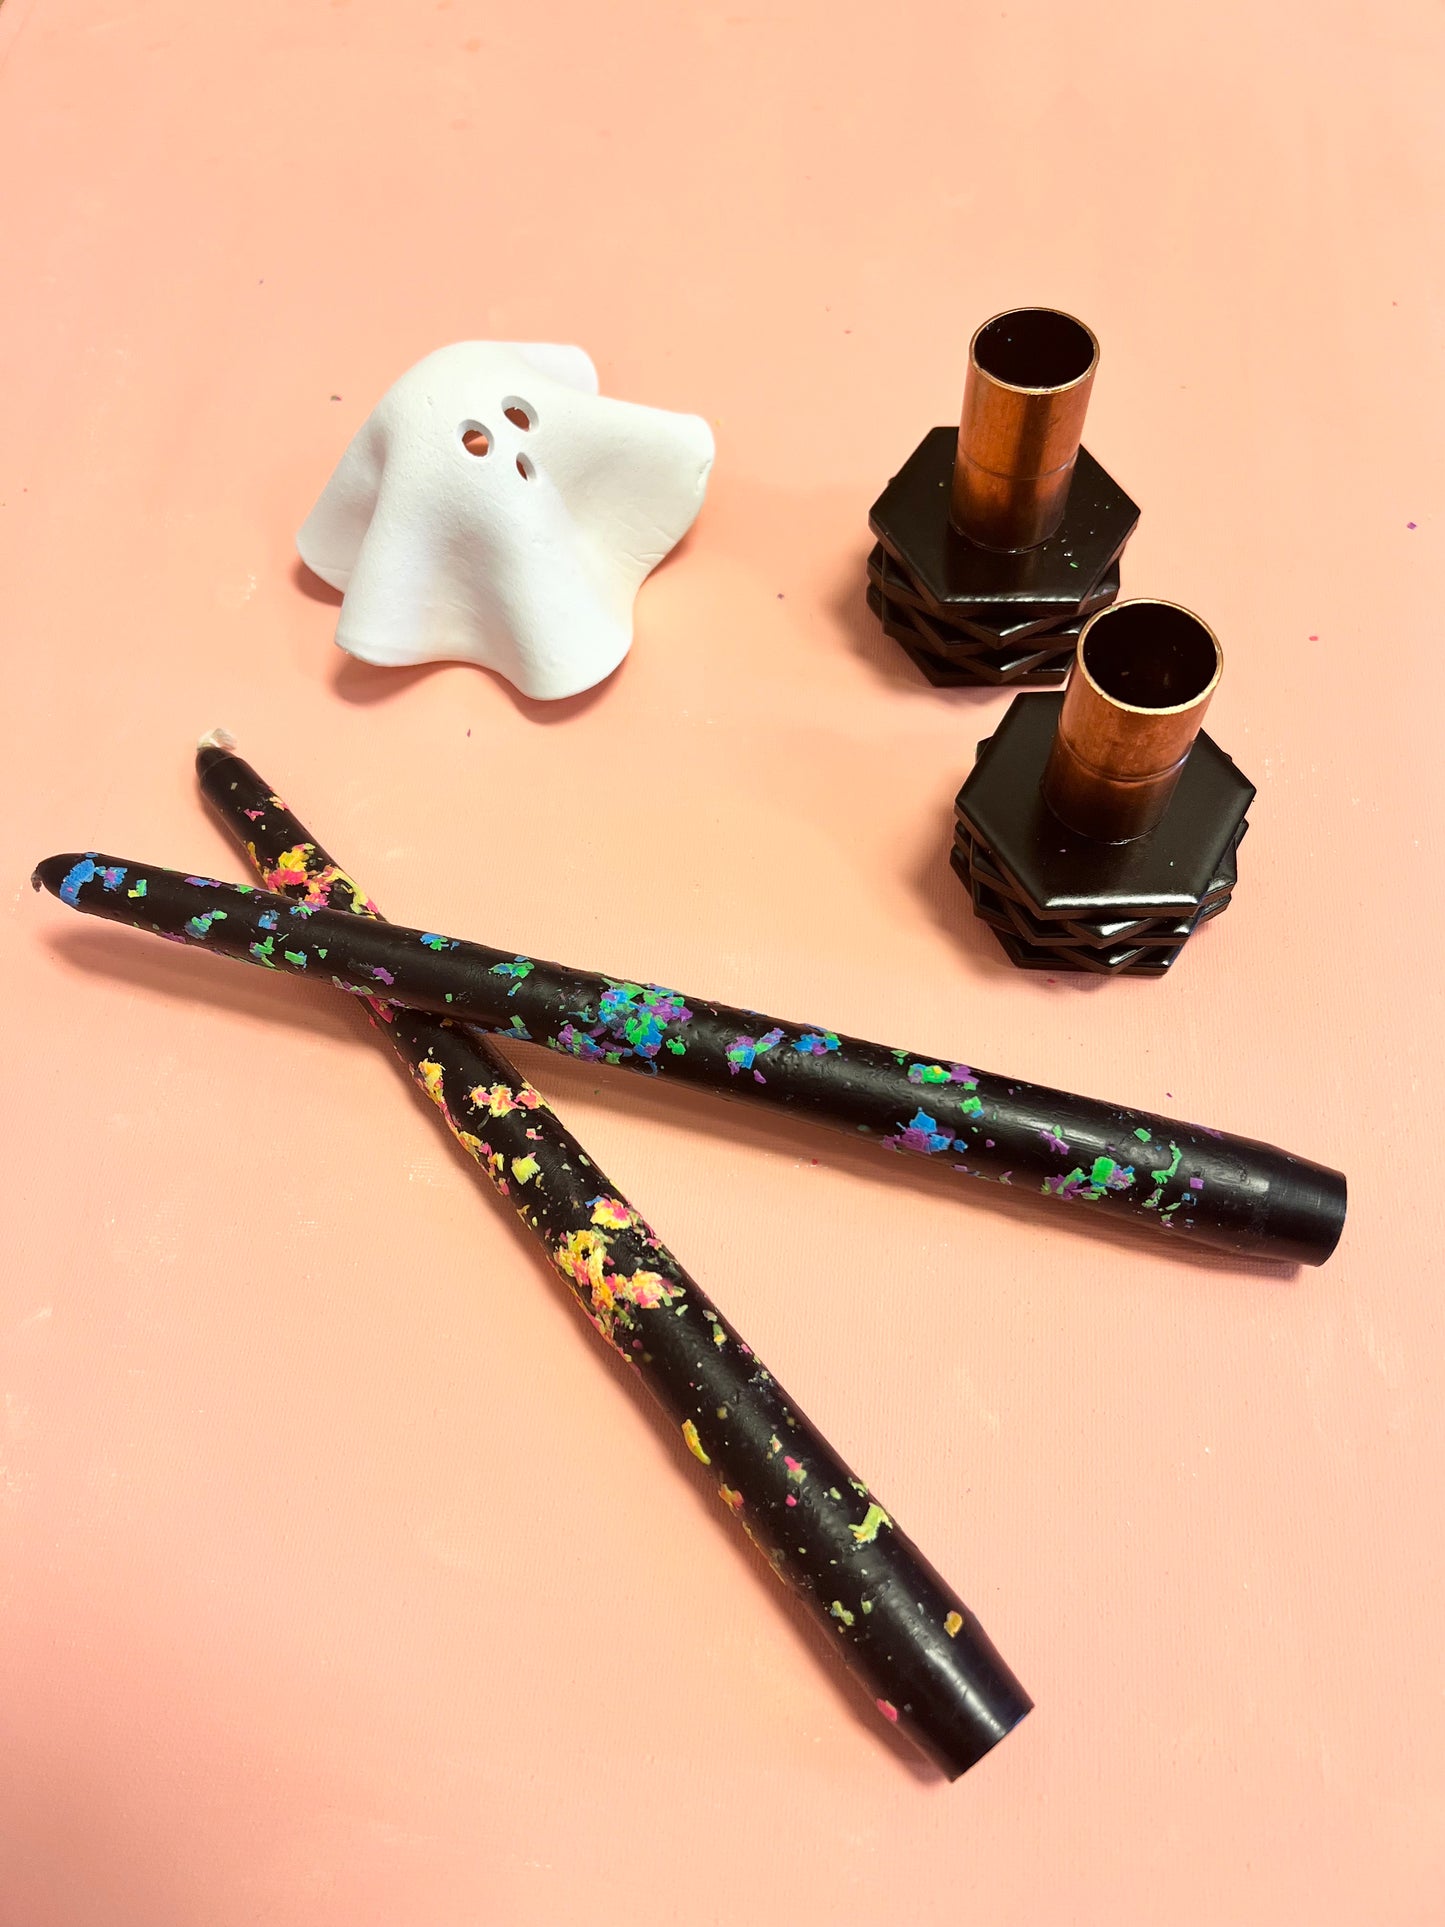 October 5th - 6:30pm - Halloween Candle Trio